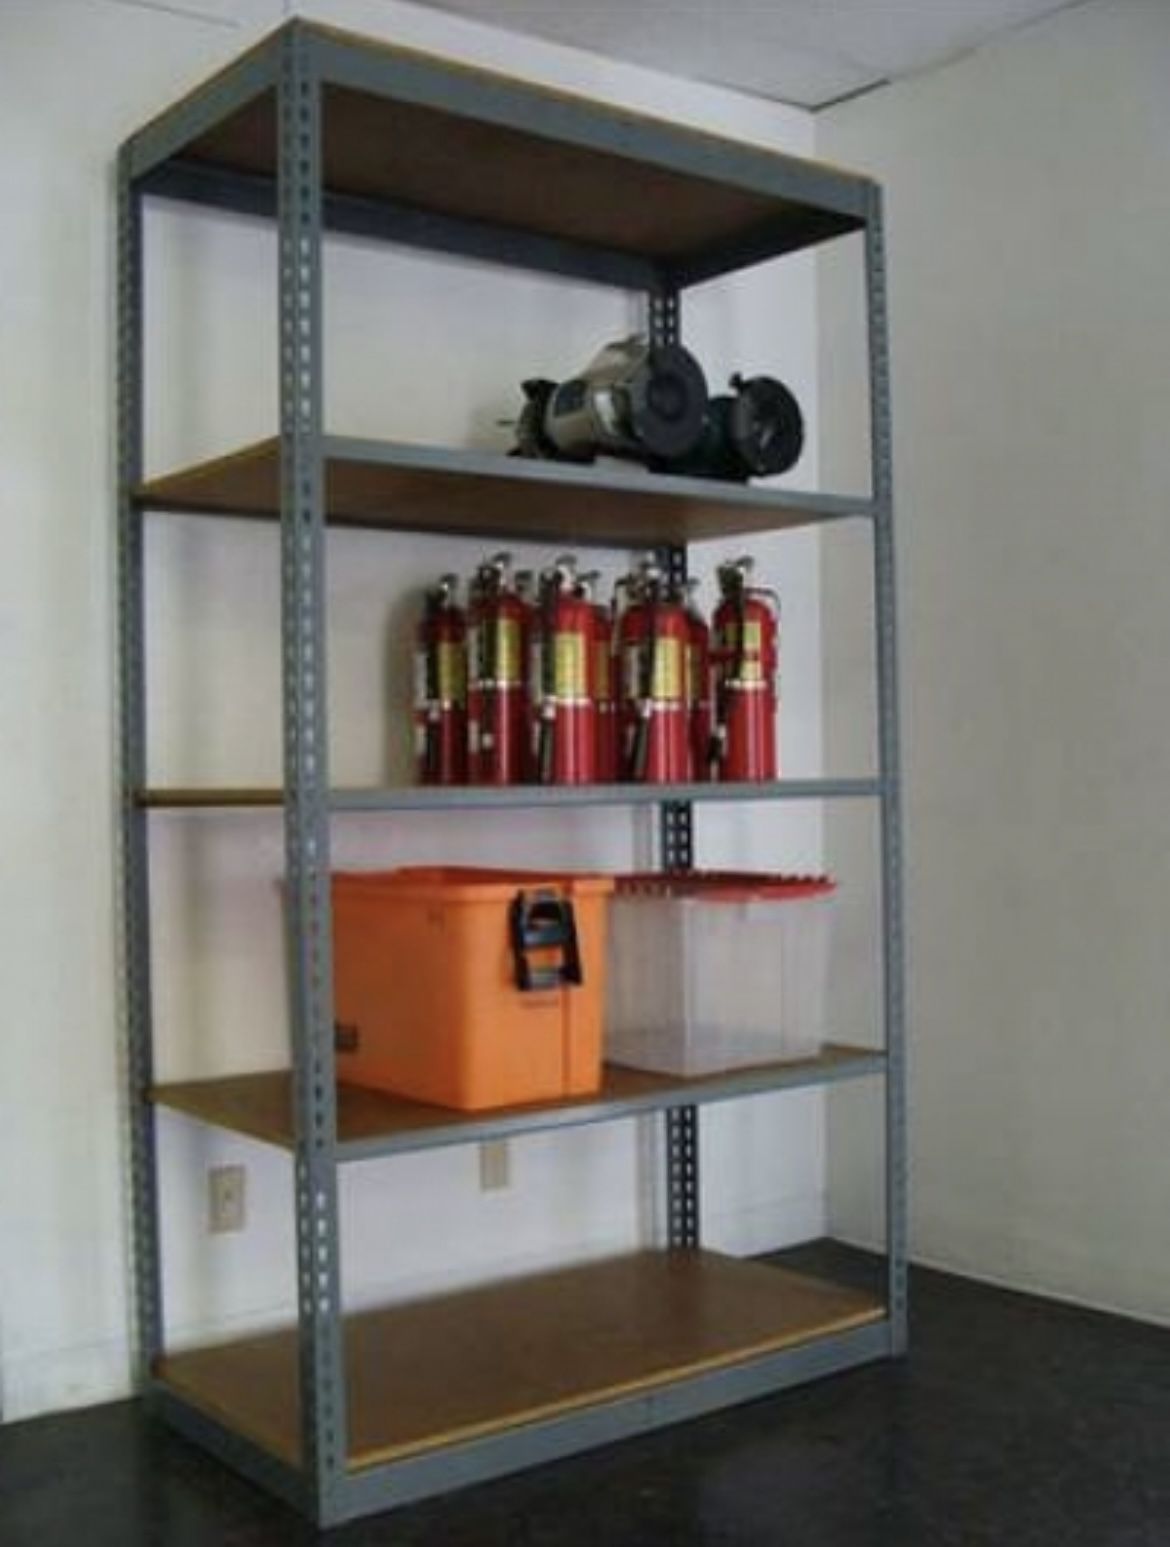 Garage Shelving 48 in W x 24 in D New Industrial Boltless Warehouse Racks stinger than Homedpot Lowes Costco Delivery Available